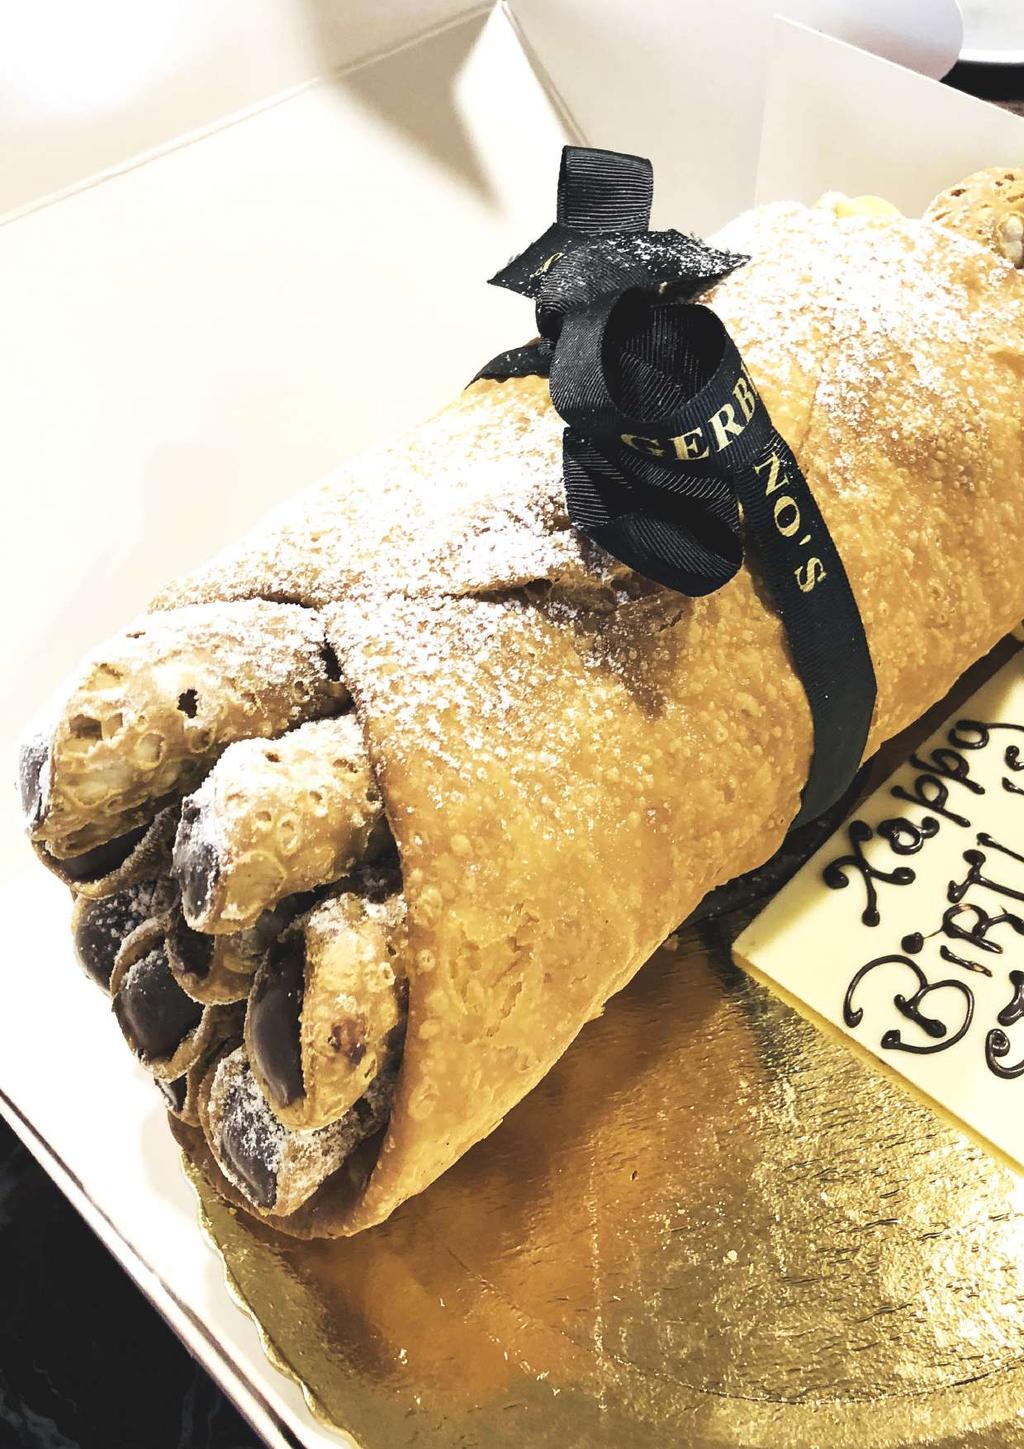 The History of the Sicilian Cannolo The cannolo has ancient origins, so old that its story often becomes a legend and is lost in the mists of time.